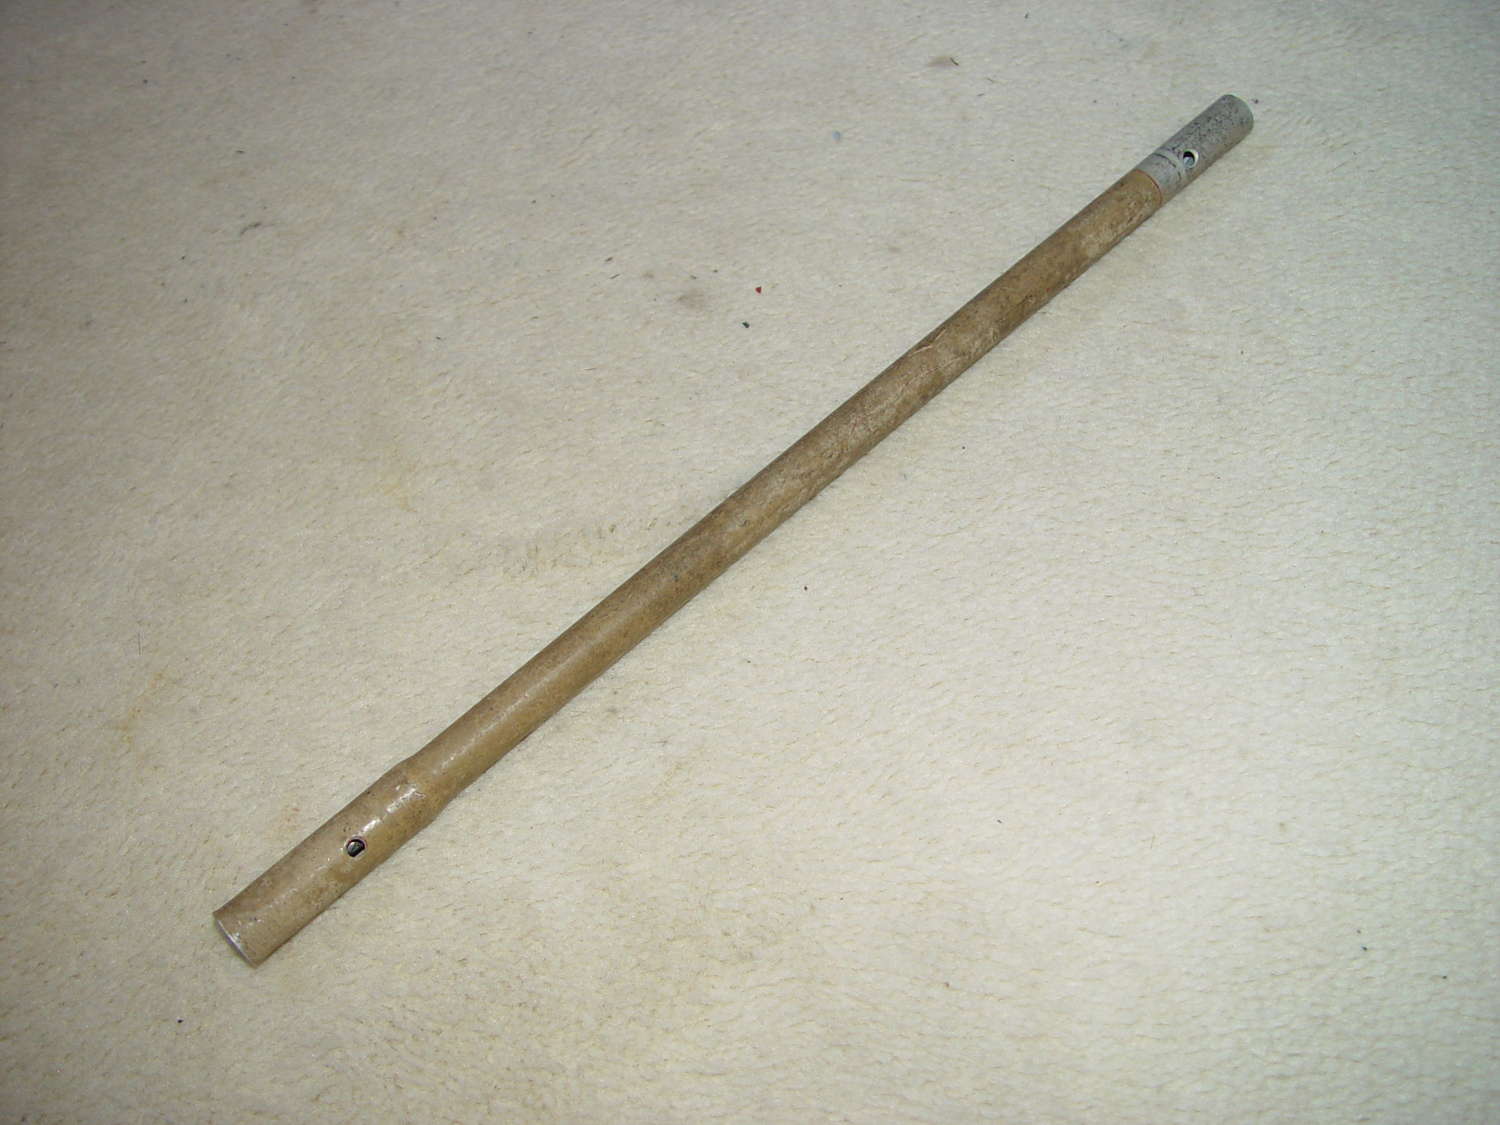 A late war antenna rod for a Torn.Fu.d2 radio